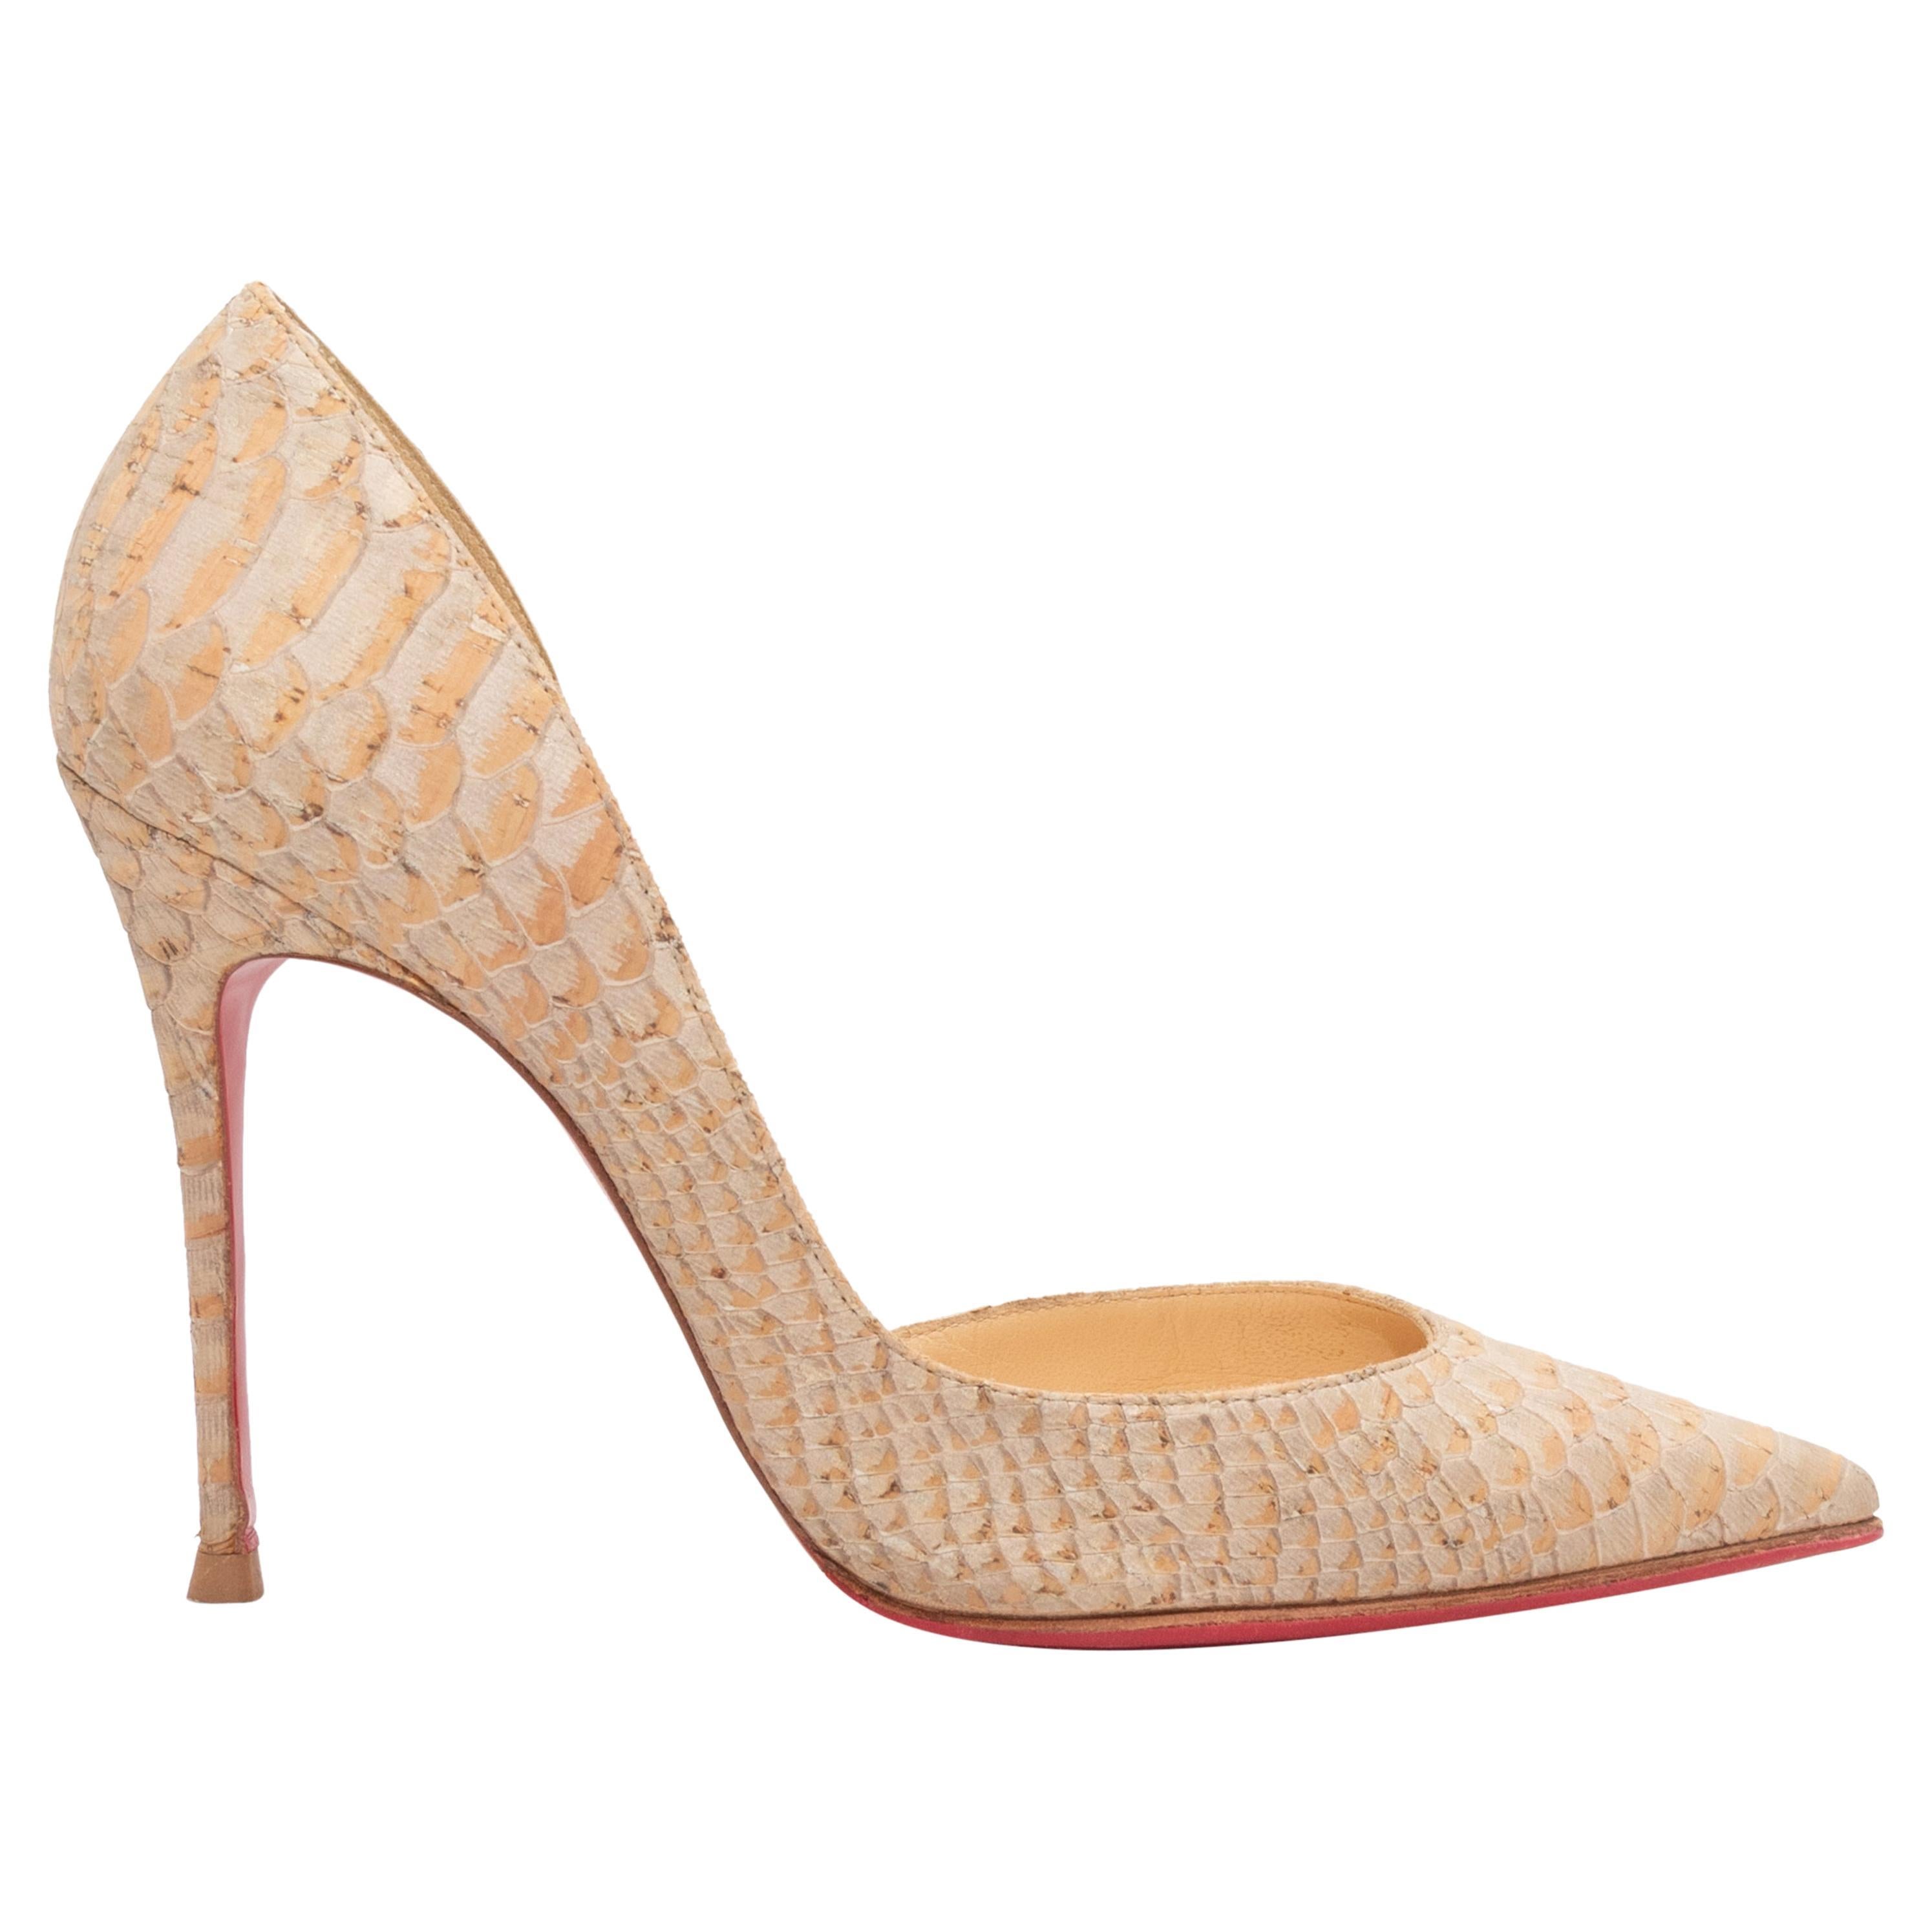 Beige Christian Louboutin Python Pointed-Toe Pumps For Sale